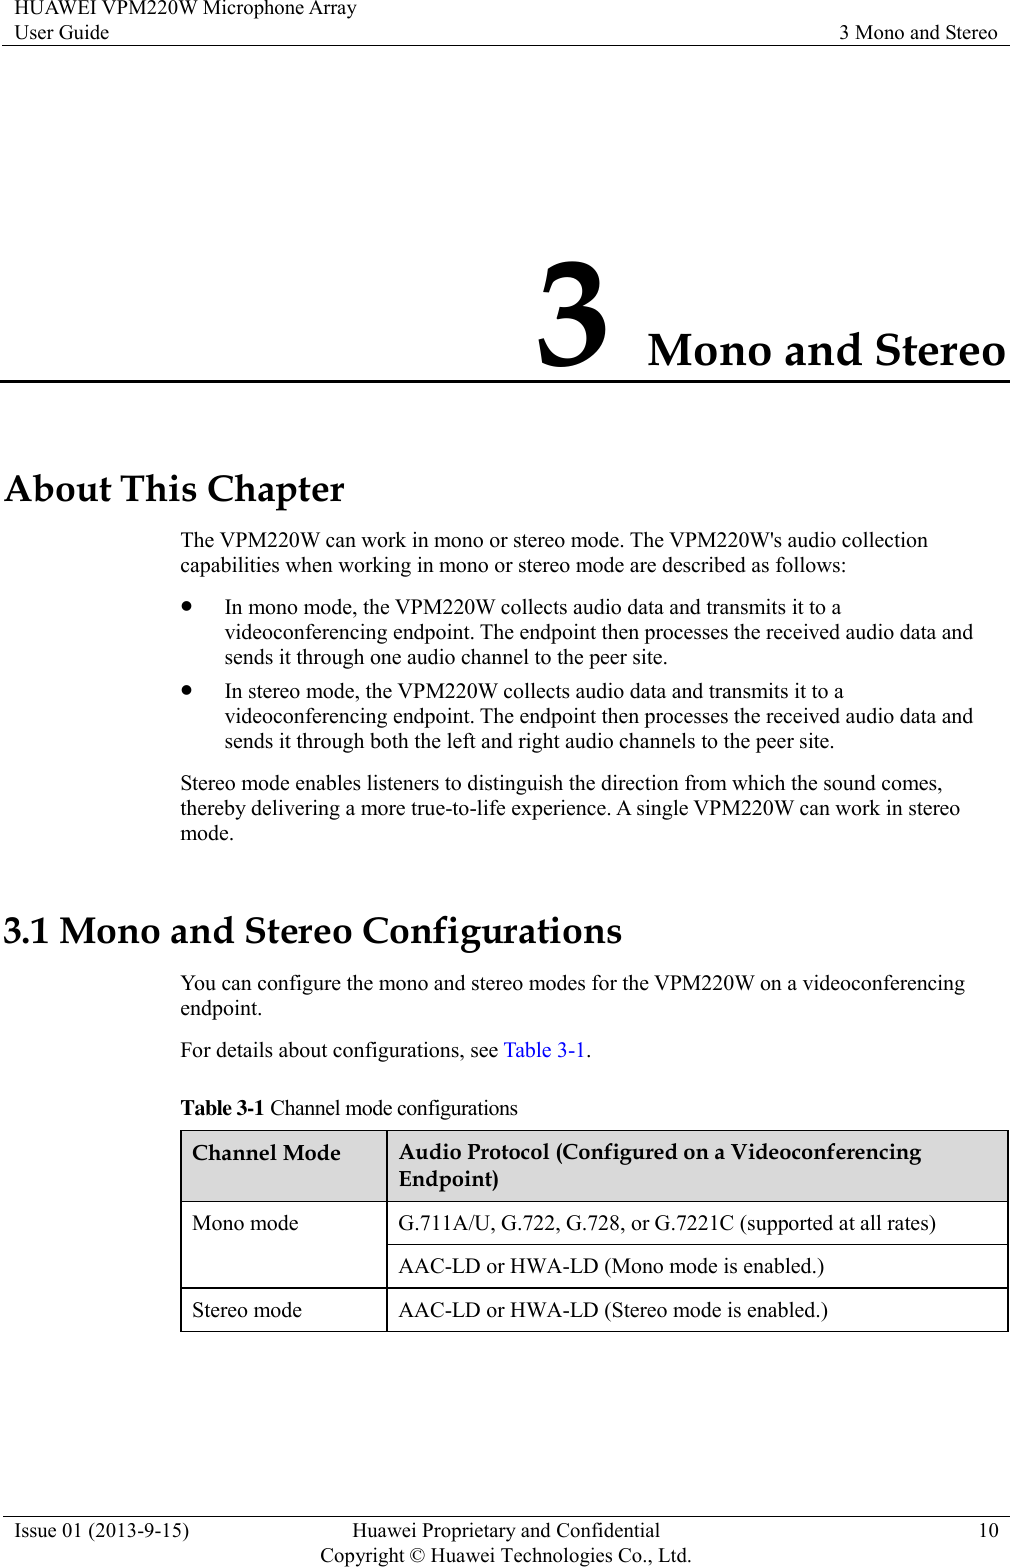 HUAWEI VPM220W Microphone Array User Guide 3 Mono and Stereo  Issue 01 (2013-9-15) Huawei Proprietary and Confidential                                     Copyright © Huawei Technologies Co., Ltd. 10  3 Mono and Stereo About This Chapter The VPM220W can work in mono or stereo mode. The VPM220W&apos;s audio collection capabilities when working in mono or stereo mode are described as follows:  In mono mode, the VPM220W collects audio data and transmits it to a videoconferencing endpoint. The endpoint then processes the received audio data and sends it through one audio channel to the peer site.  In stereo mode, the VPM220W collects audio data and transmits it to a videoconferencing endpoint. The endpoint then processes the received audio data and sends it through both the left and right audio channels to the peer site. Stereo mode enables listeners to distinguish the direction from which the sound comes, thereby delivering a more true-to-life experience. A single VPM220W can work in stereo mode. 3.1 Mono and Stereo Configurations You can configure the mono and stereo modes for the VPM220W on a videoconferencing endpoint. For details about configurations, see Table 3-1. Table 3-1 Channel mode configurations Channel Mode Audio Protocol (Configured on a Videoconferencing Endpoint) Mono mode G.711A/U, G.722, G.728, or G.7221C (supported at all rates) AAC-LD or HWA-LD (Mono mode is enabled.) Stereo mode AAC-LD or HWA-LD (Stereo mode is enabled.)  